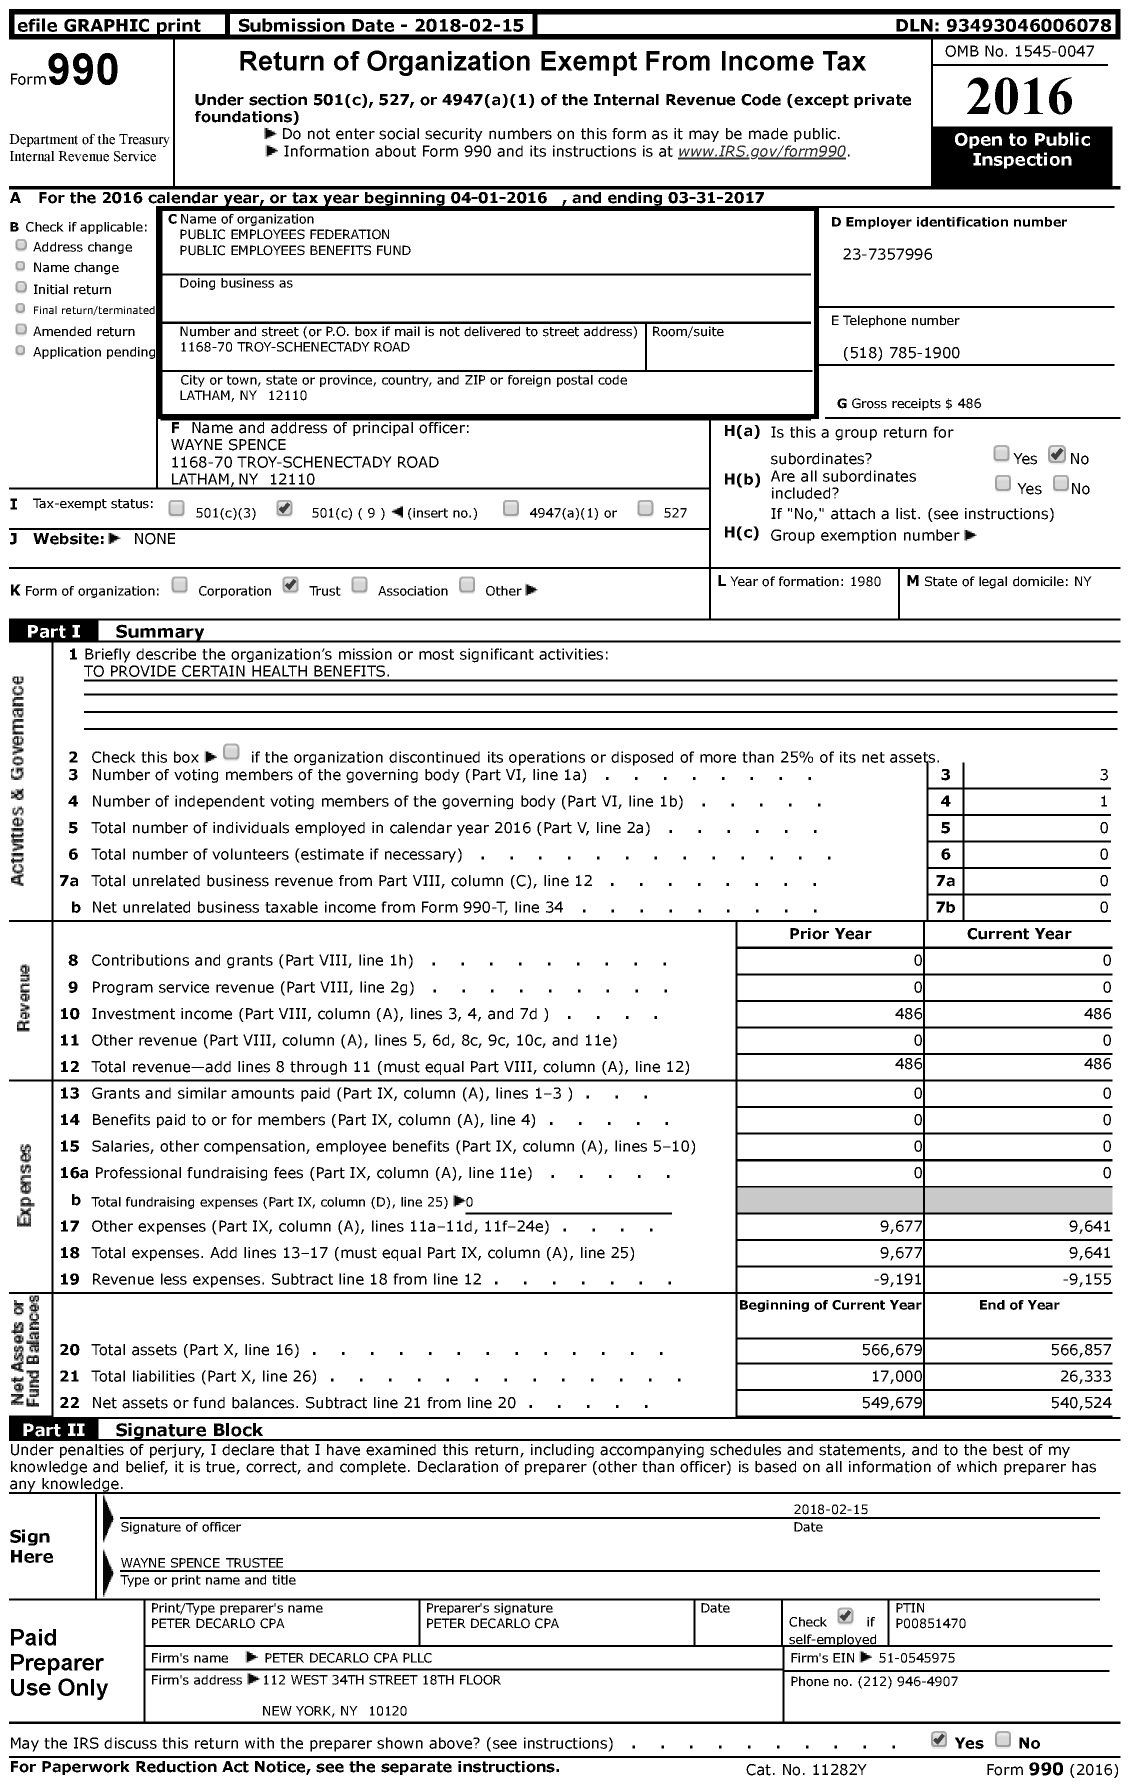 Image of first page of 2016 Form 990 for Public Employees Federation Public Employees Benefits Fund